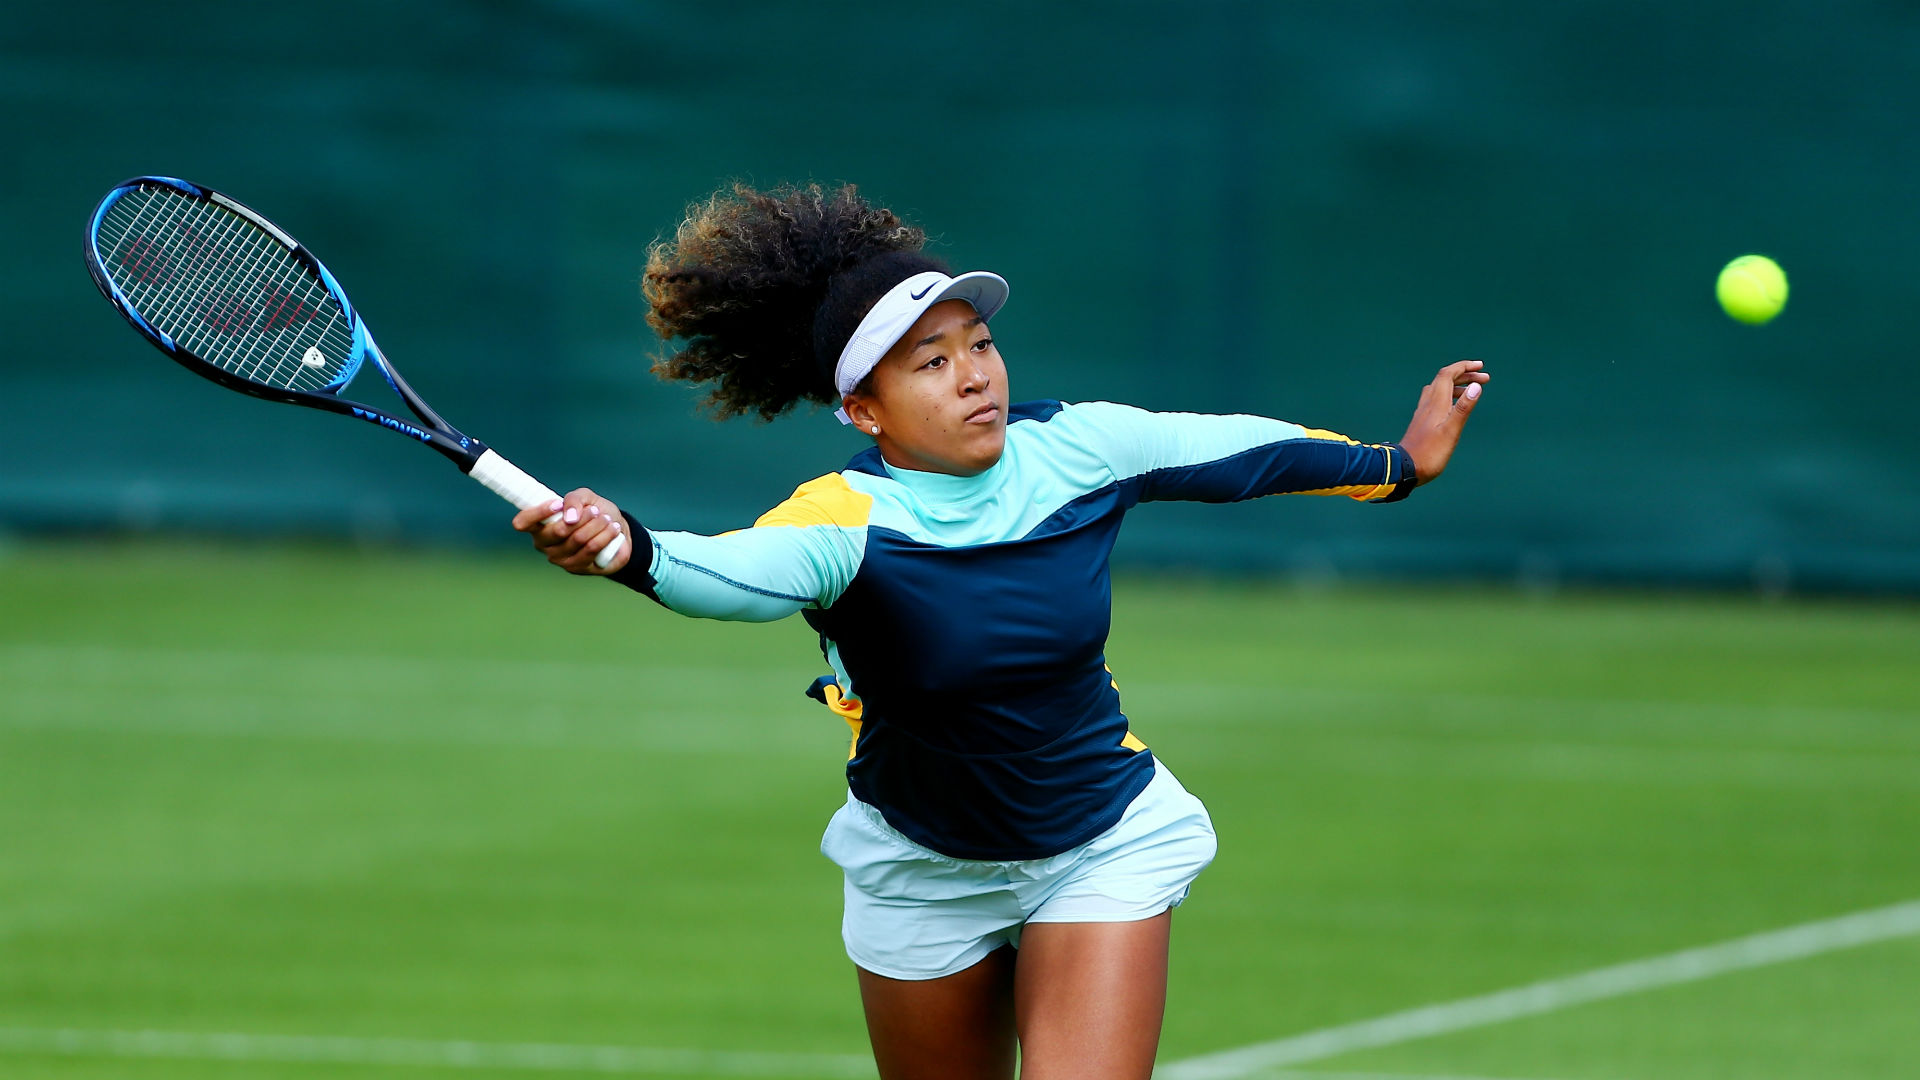 After the stifling pressure of chasing a third consecutive grand slam, Naomi Osaka feels ready to make a mark on grass in England.